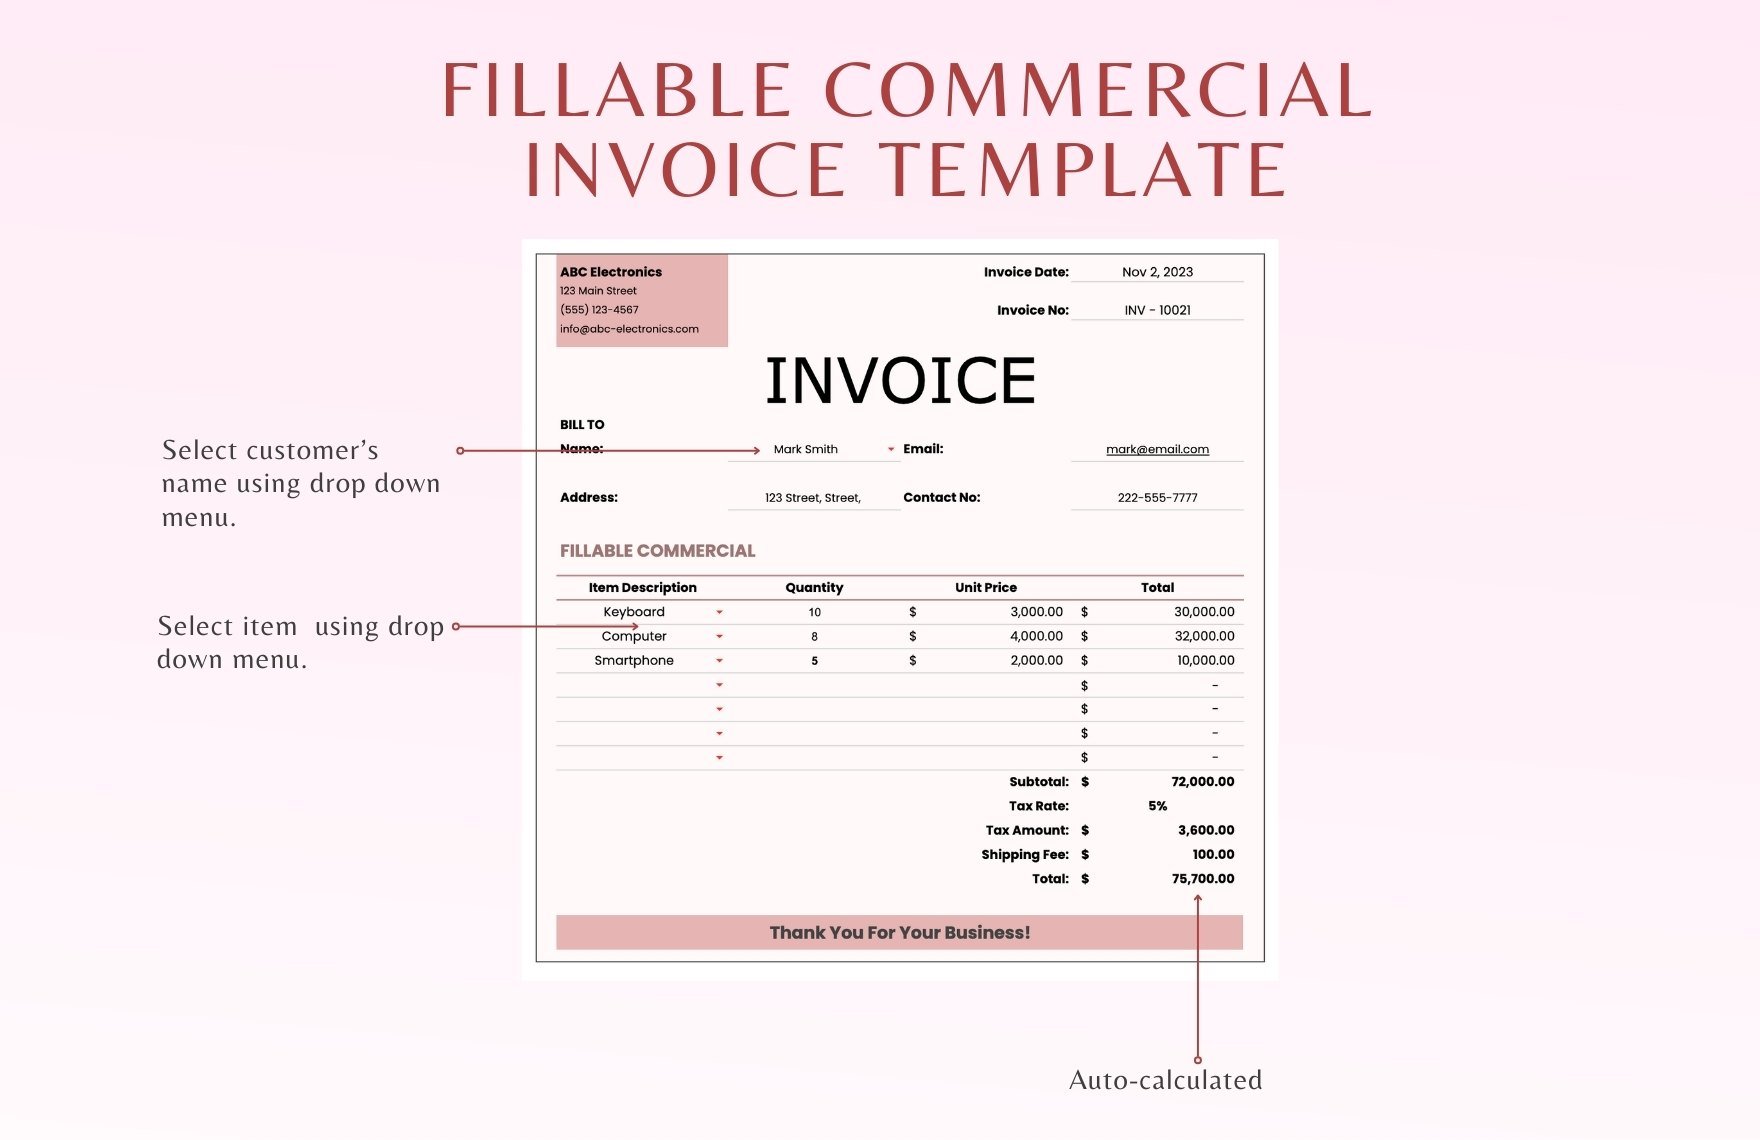 Fillable Commercial Invoice Template